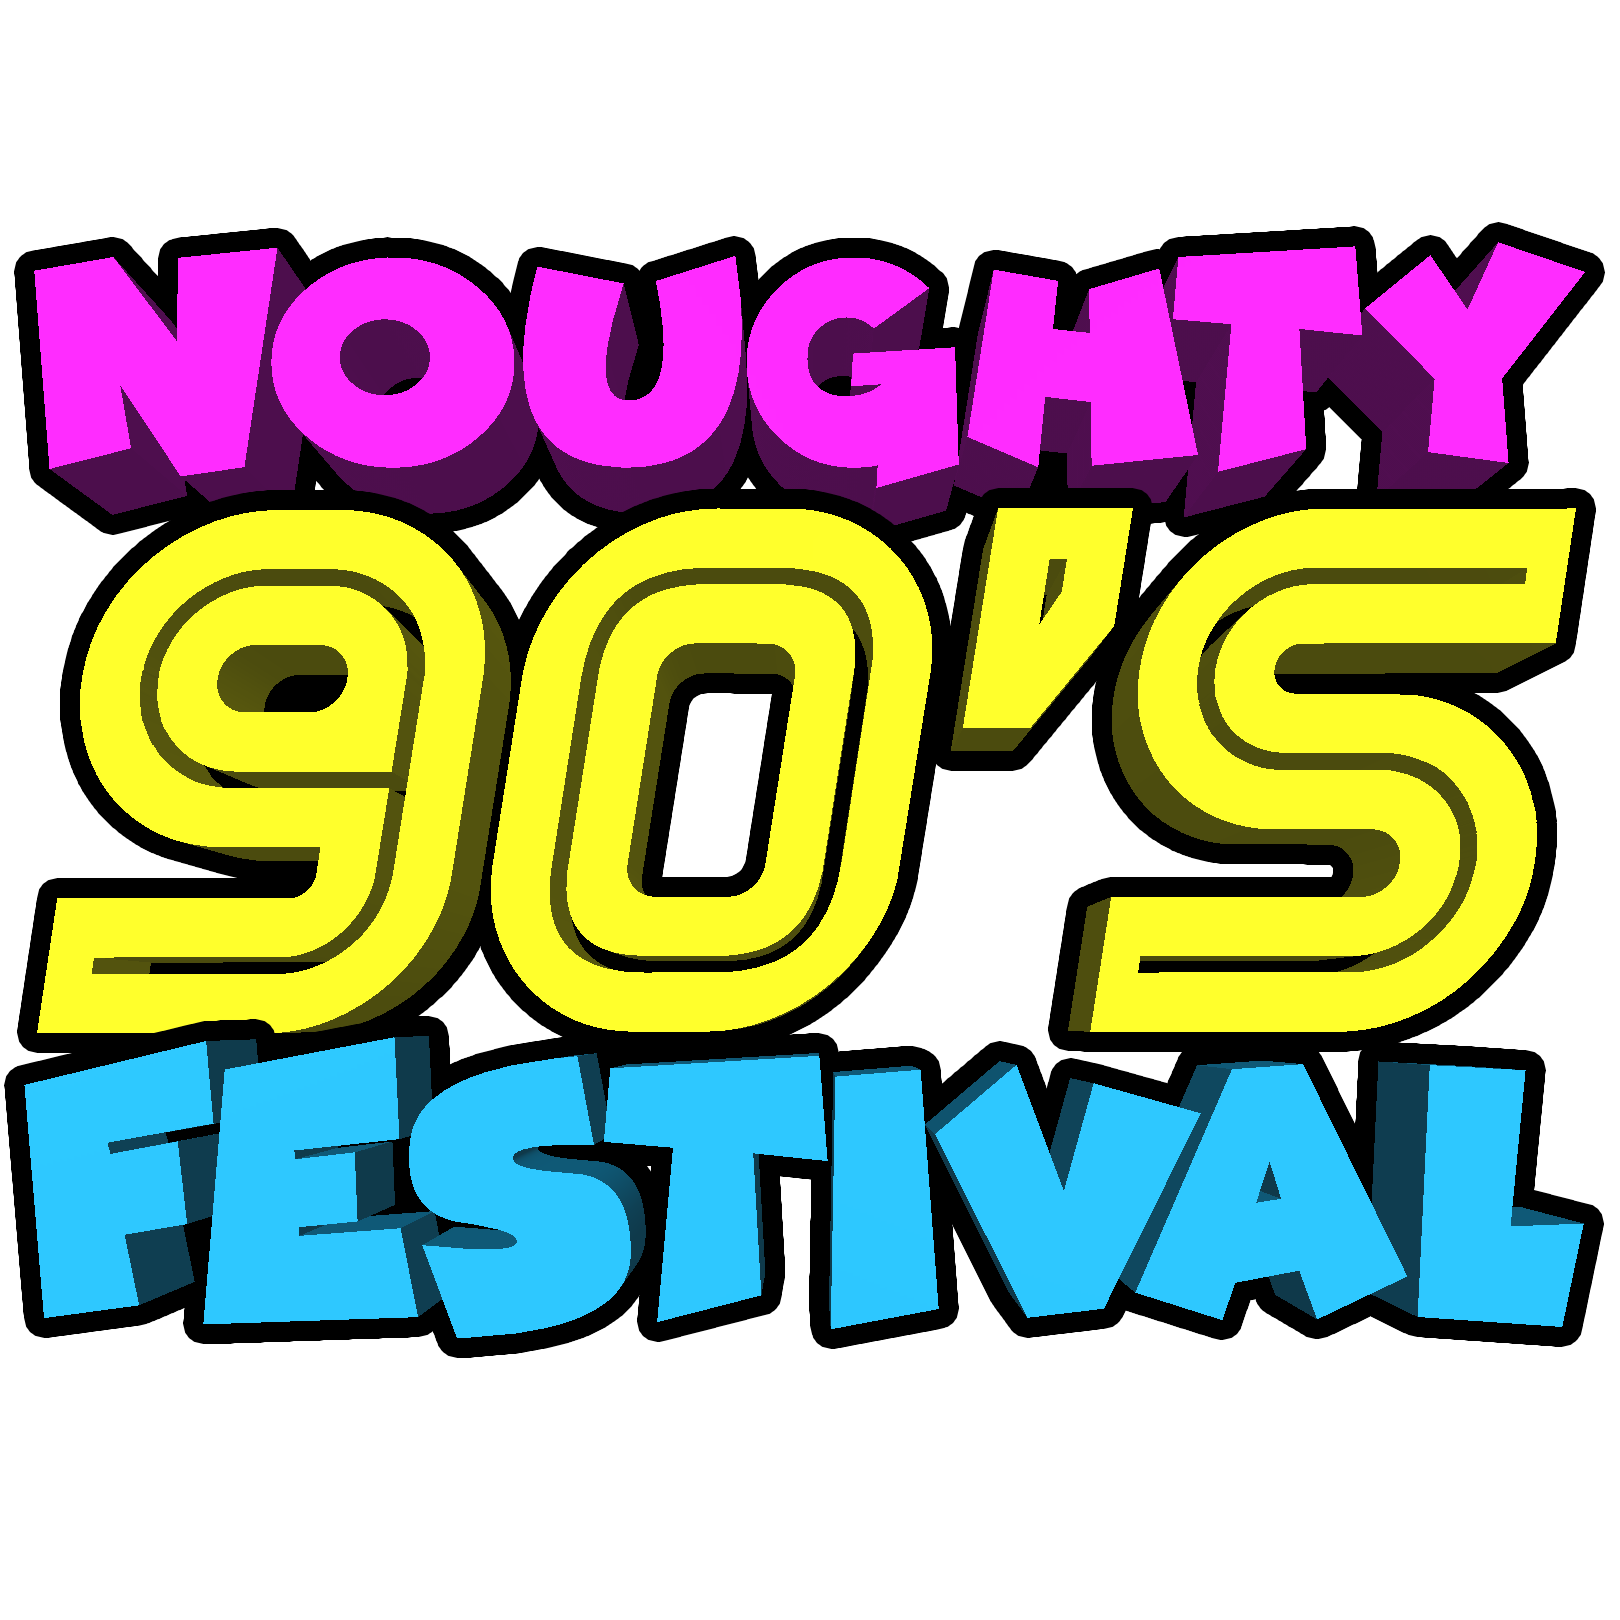 Noughty 90's Newcastle